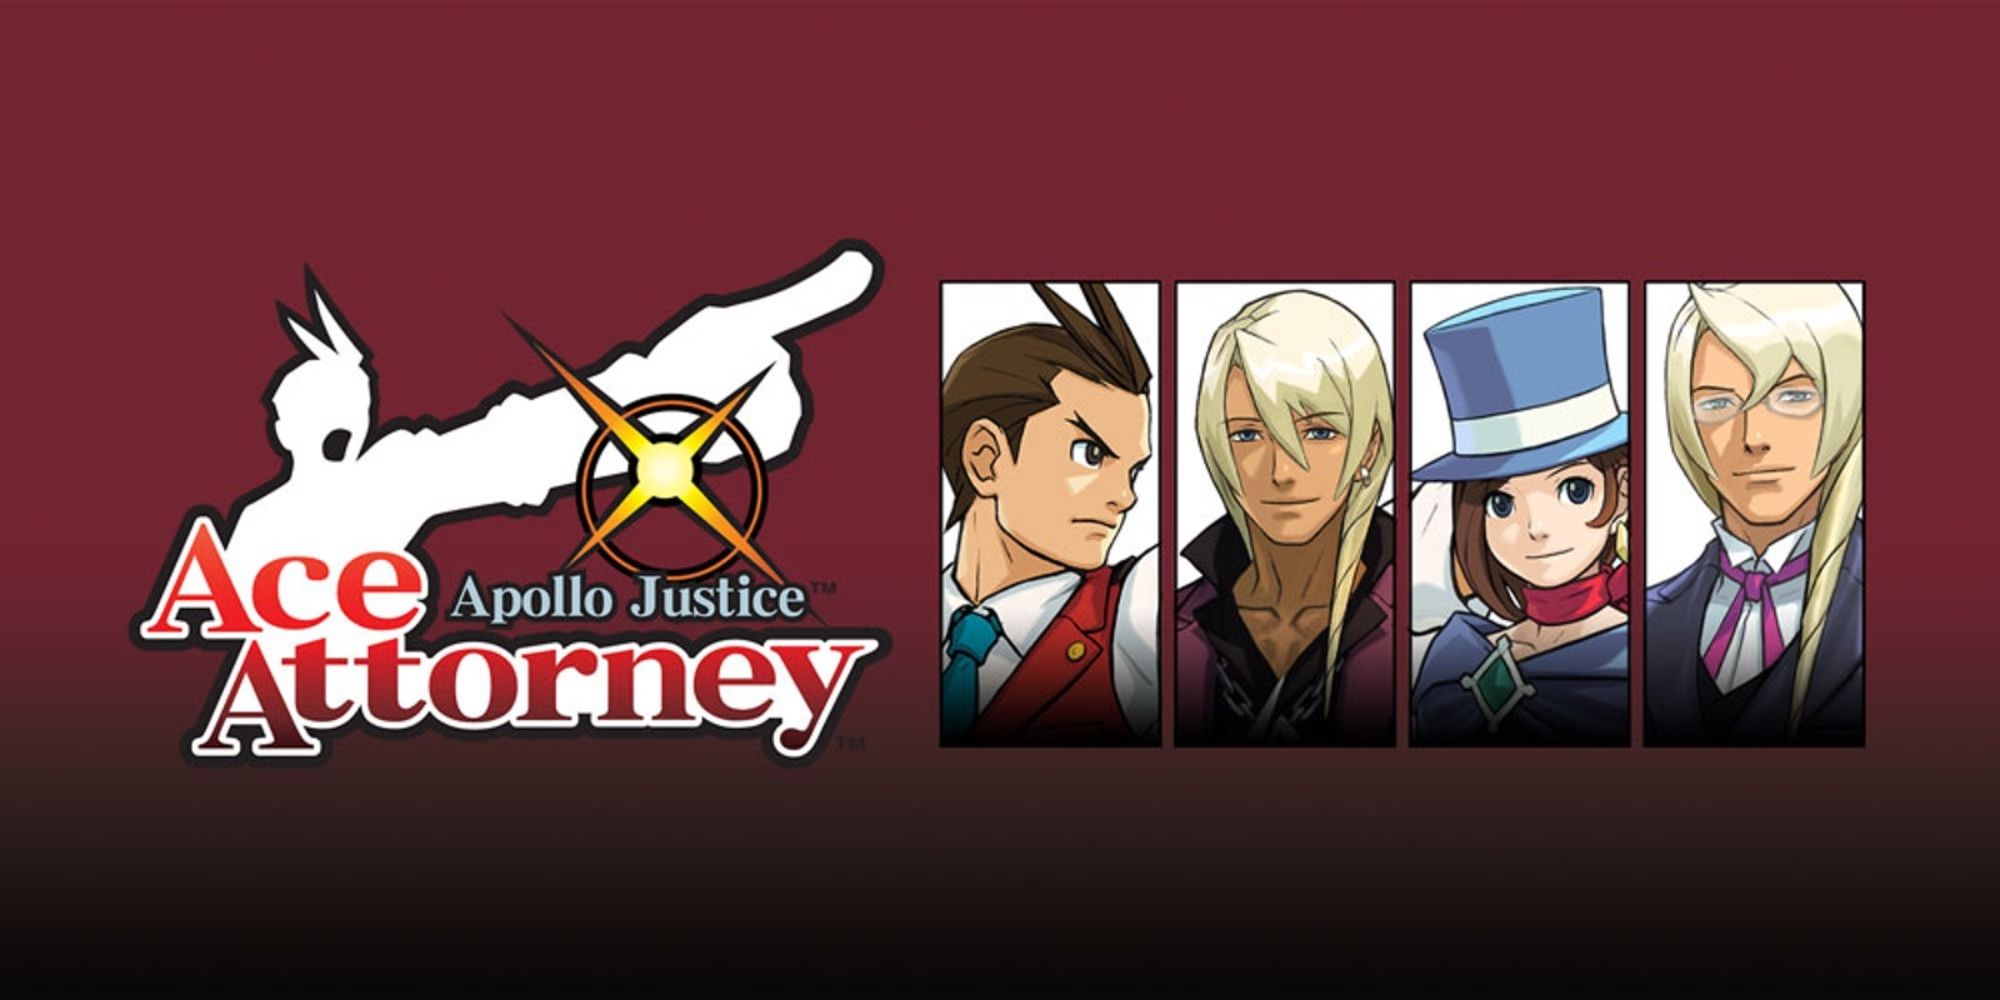 Apollo Justice Ace Attorney Game cover featuring Phoenix, Clavier, Tracy and Kristoph